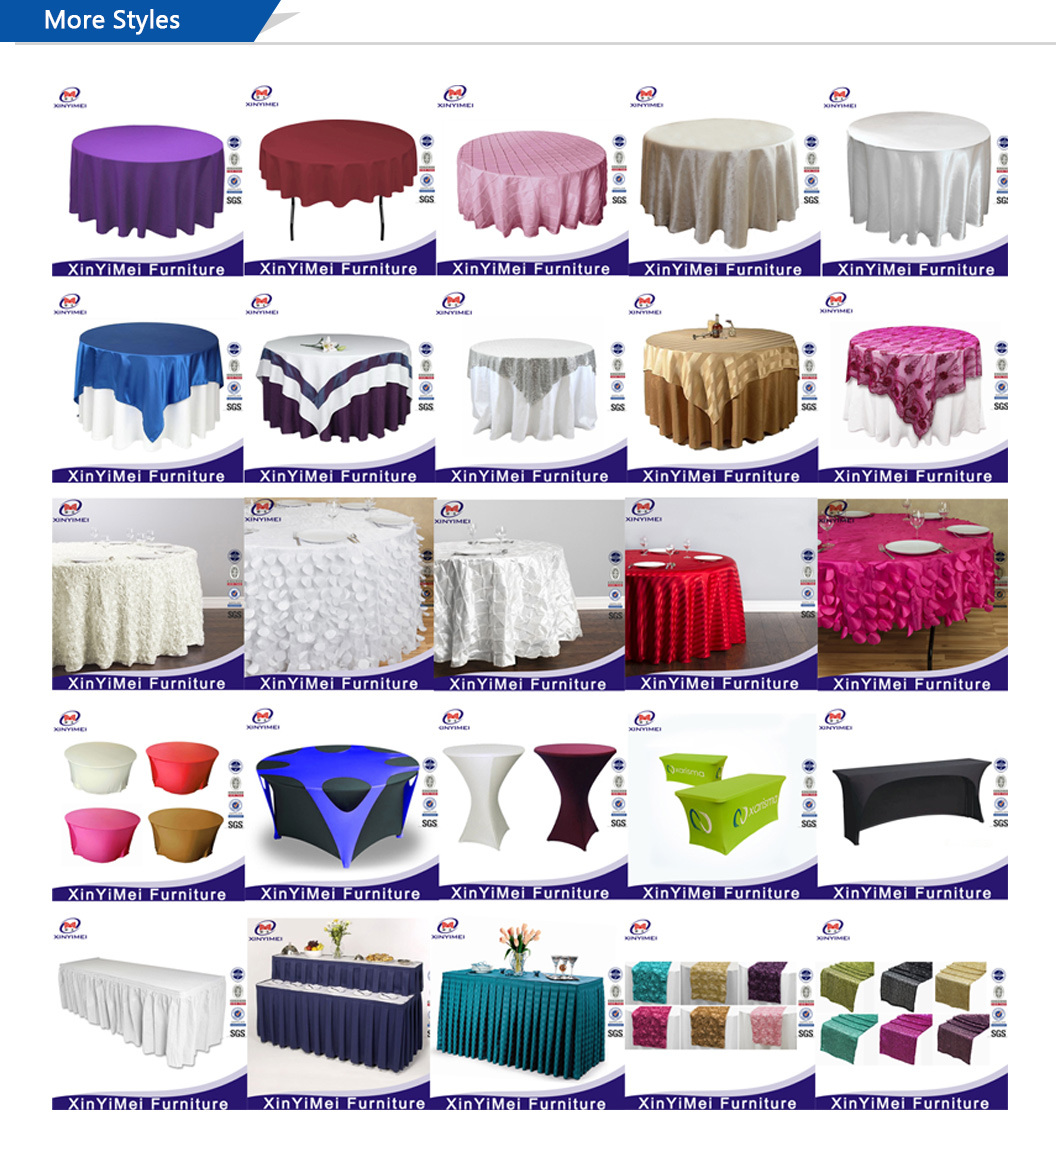 High Quality Fancy Spandex Table Cloth for Hotel Restaurant